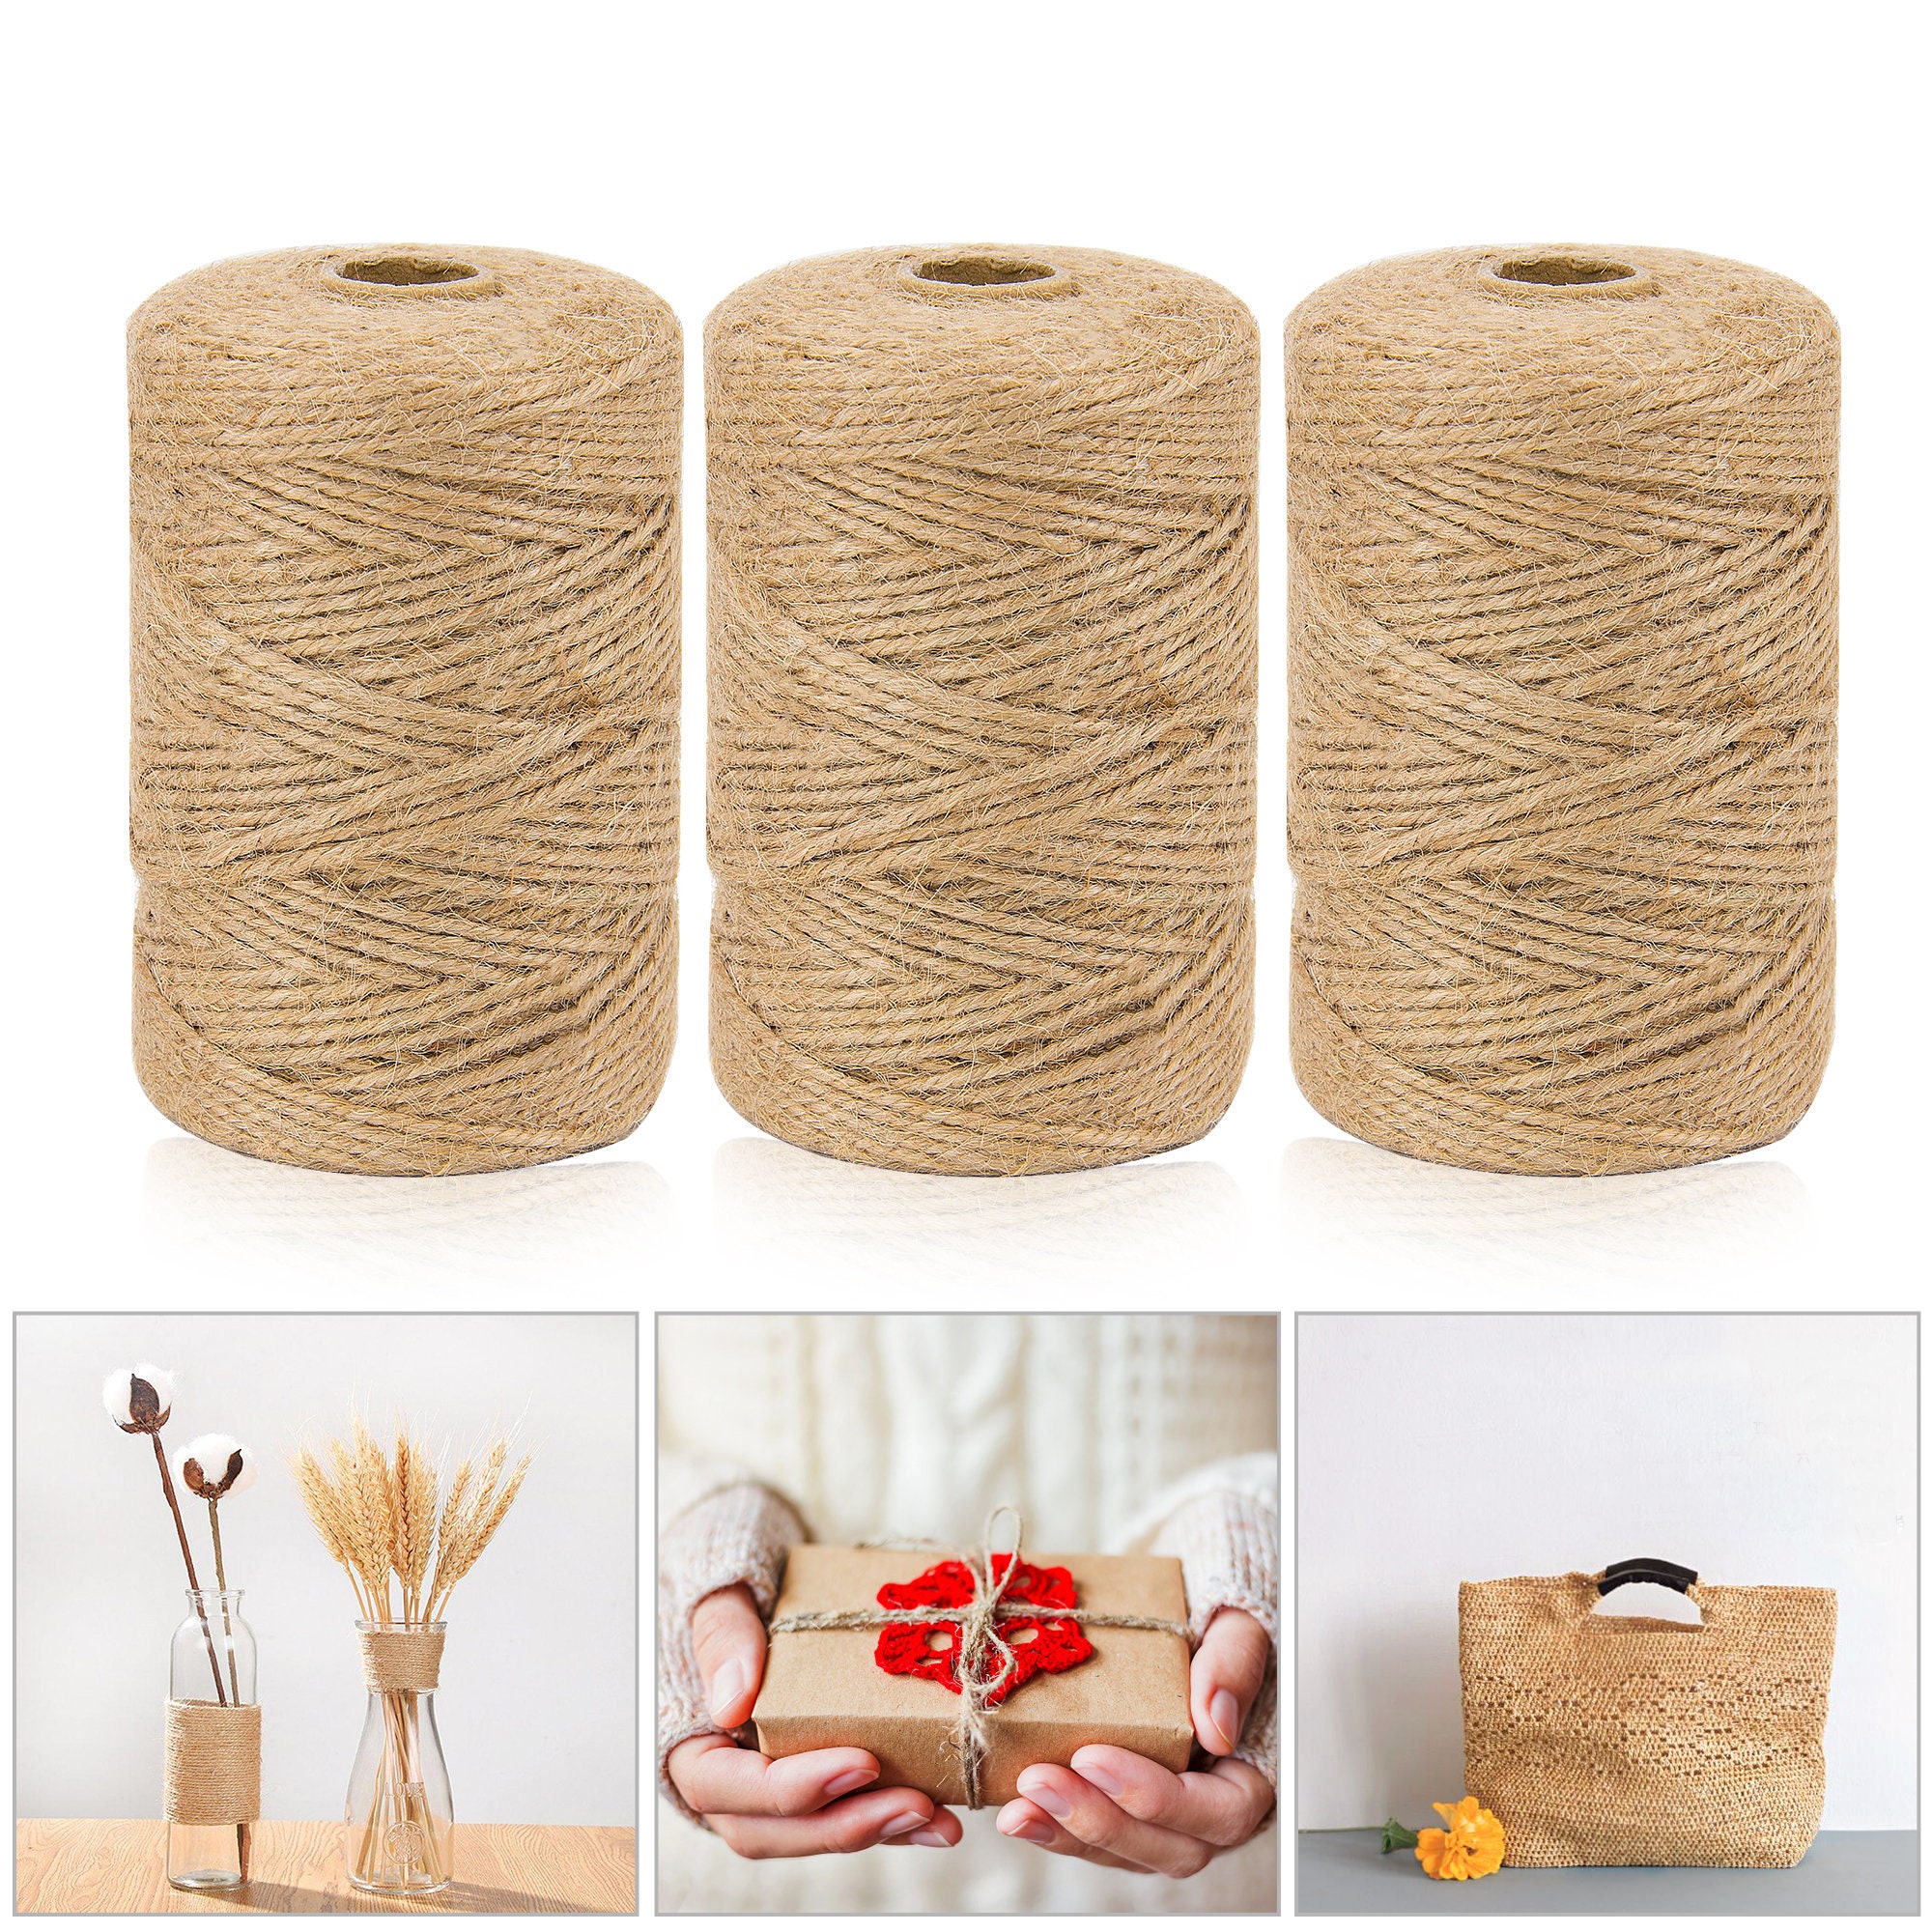 Wrapping Twine Gift Wrap Twine Jute Rope Gift Wrapping Packing